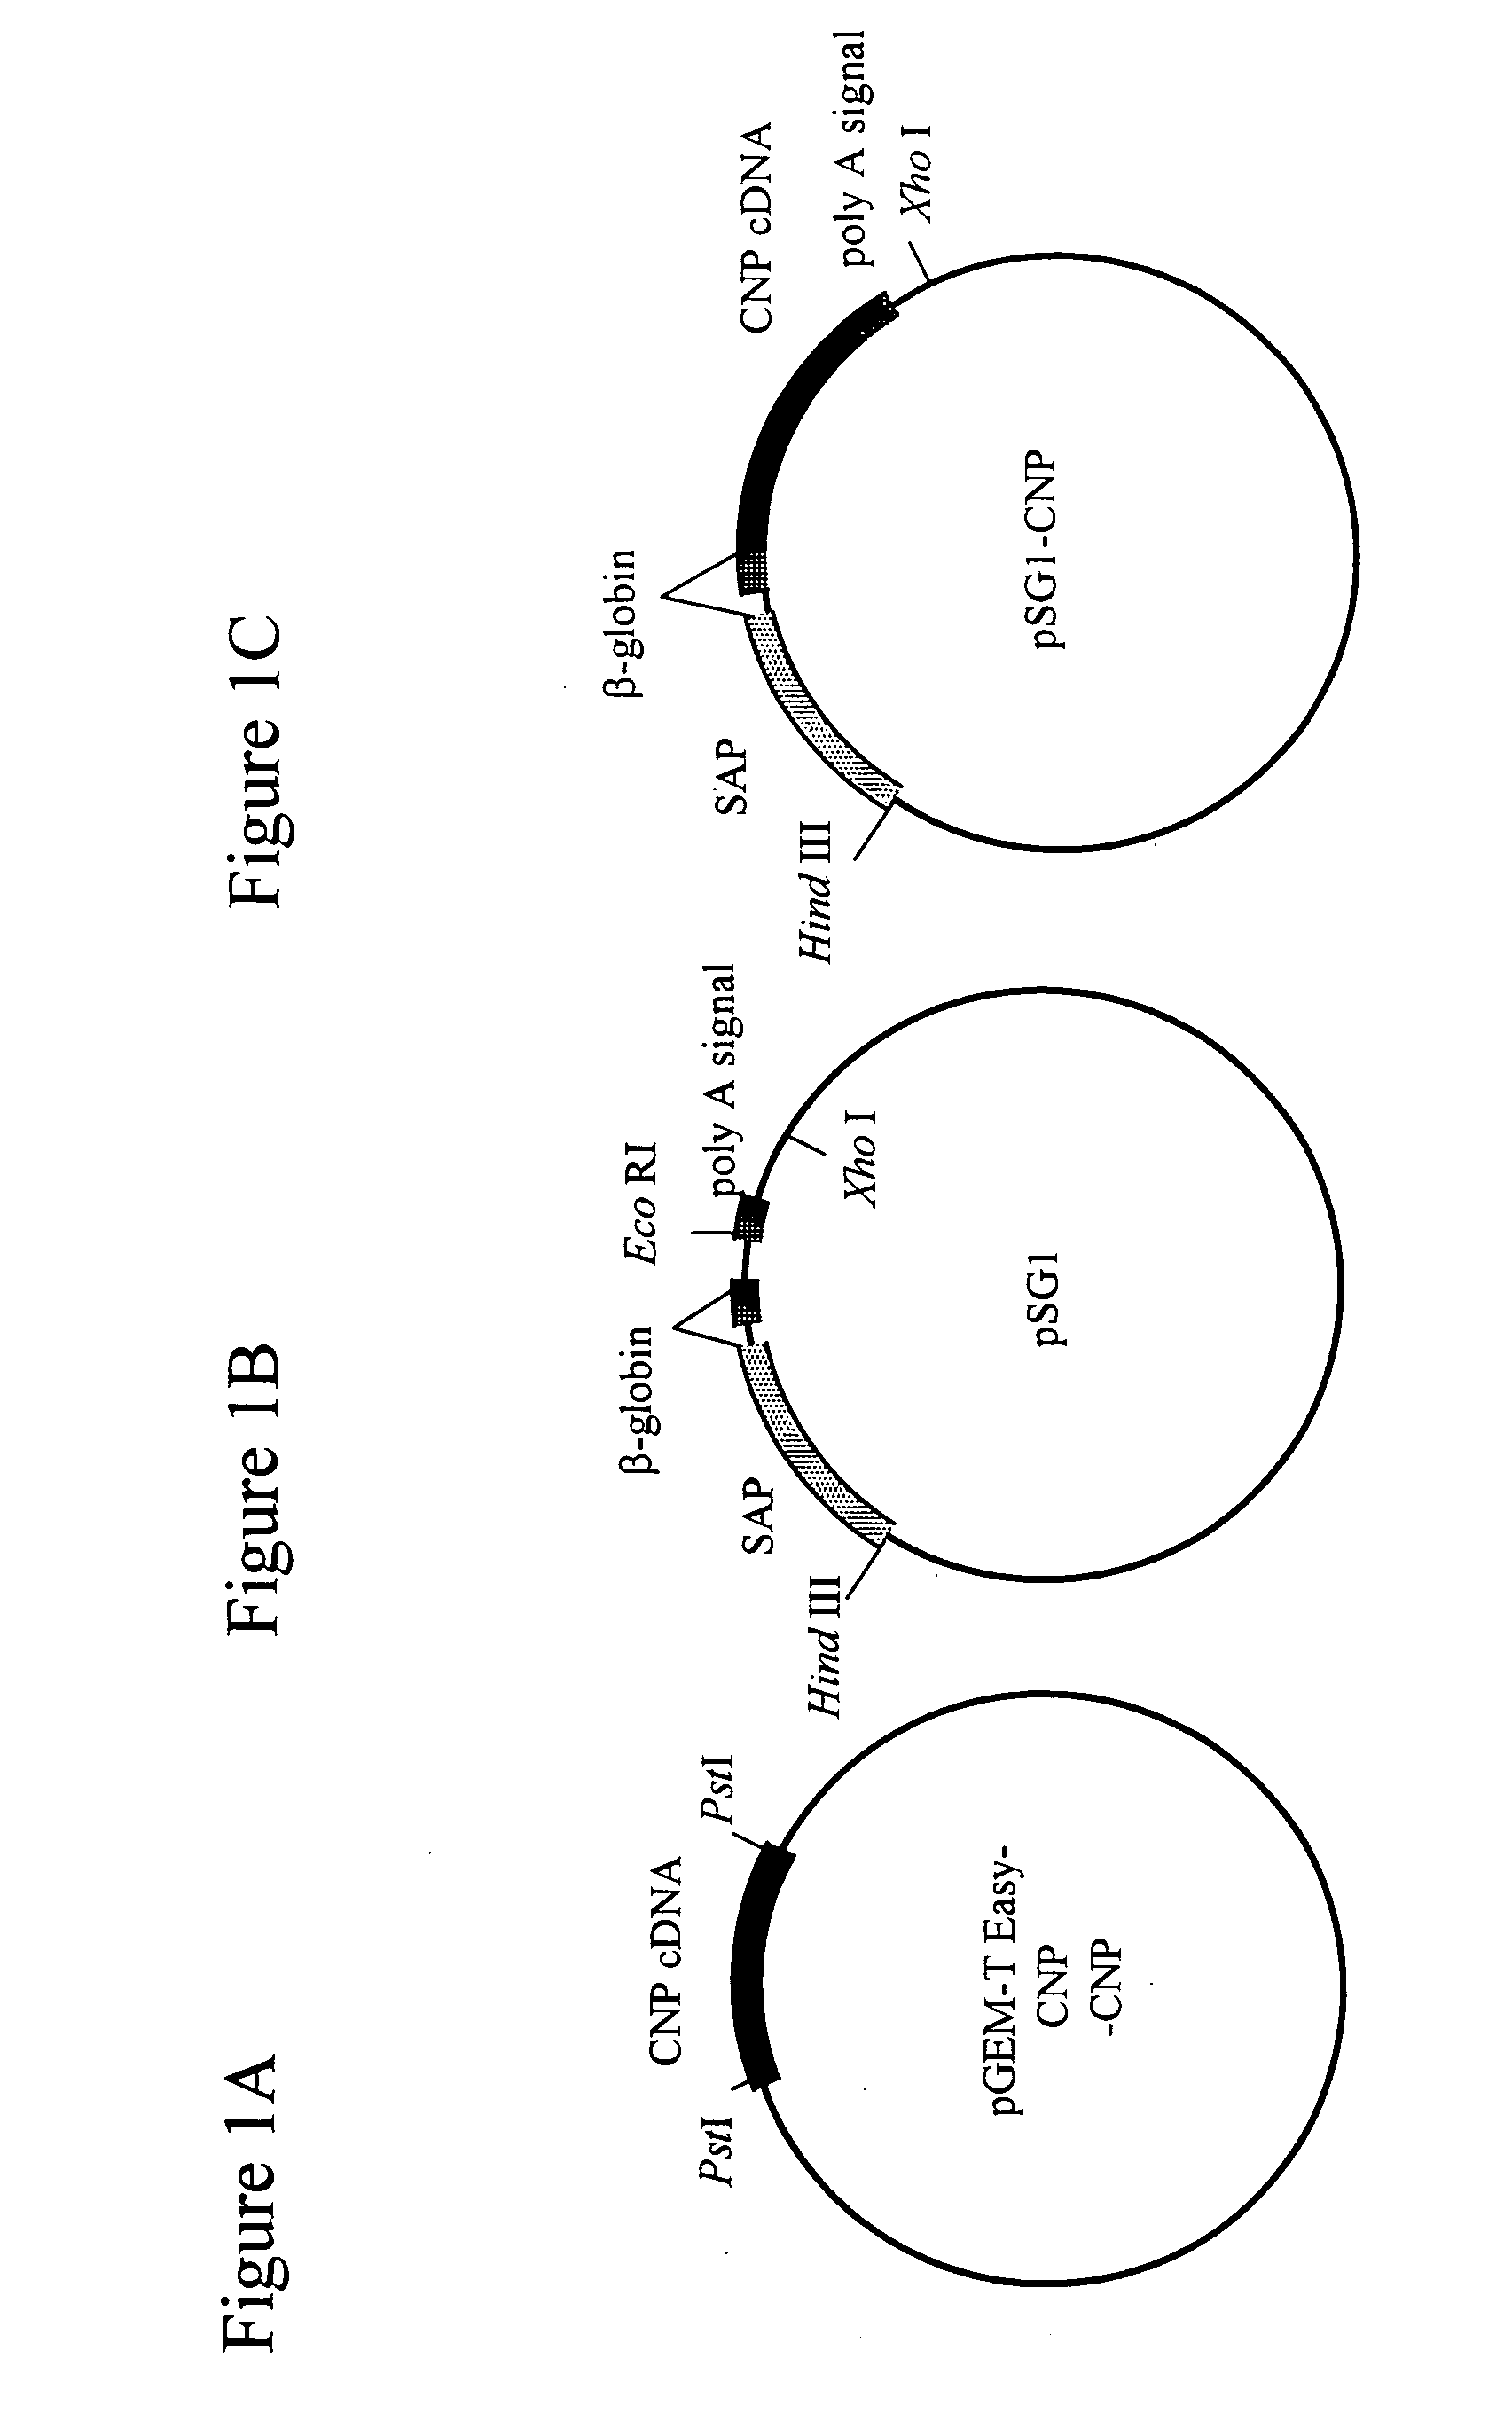 Theurapeutic or prophyiactic agent for arthritis